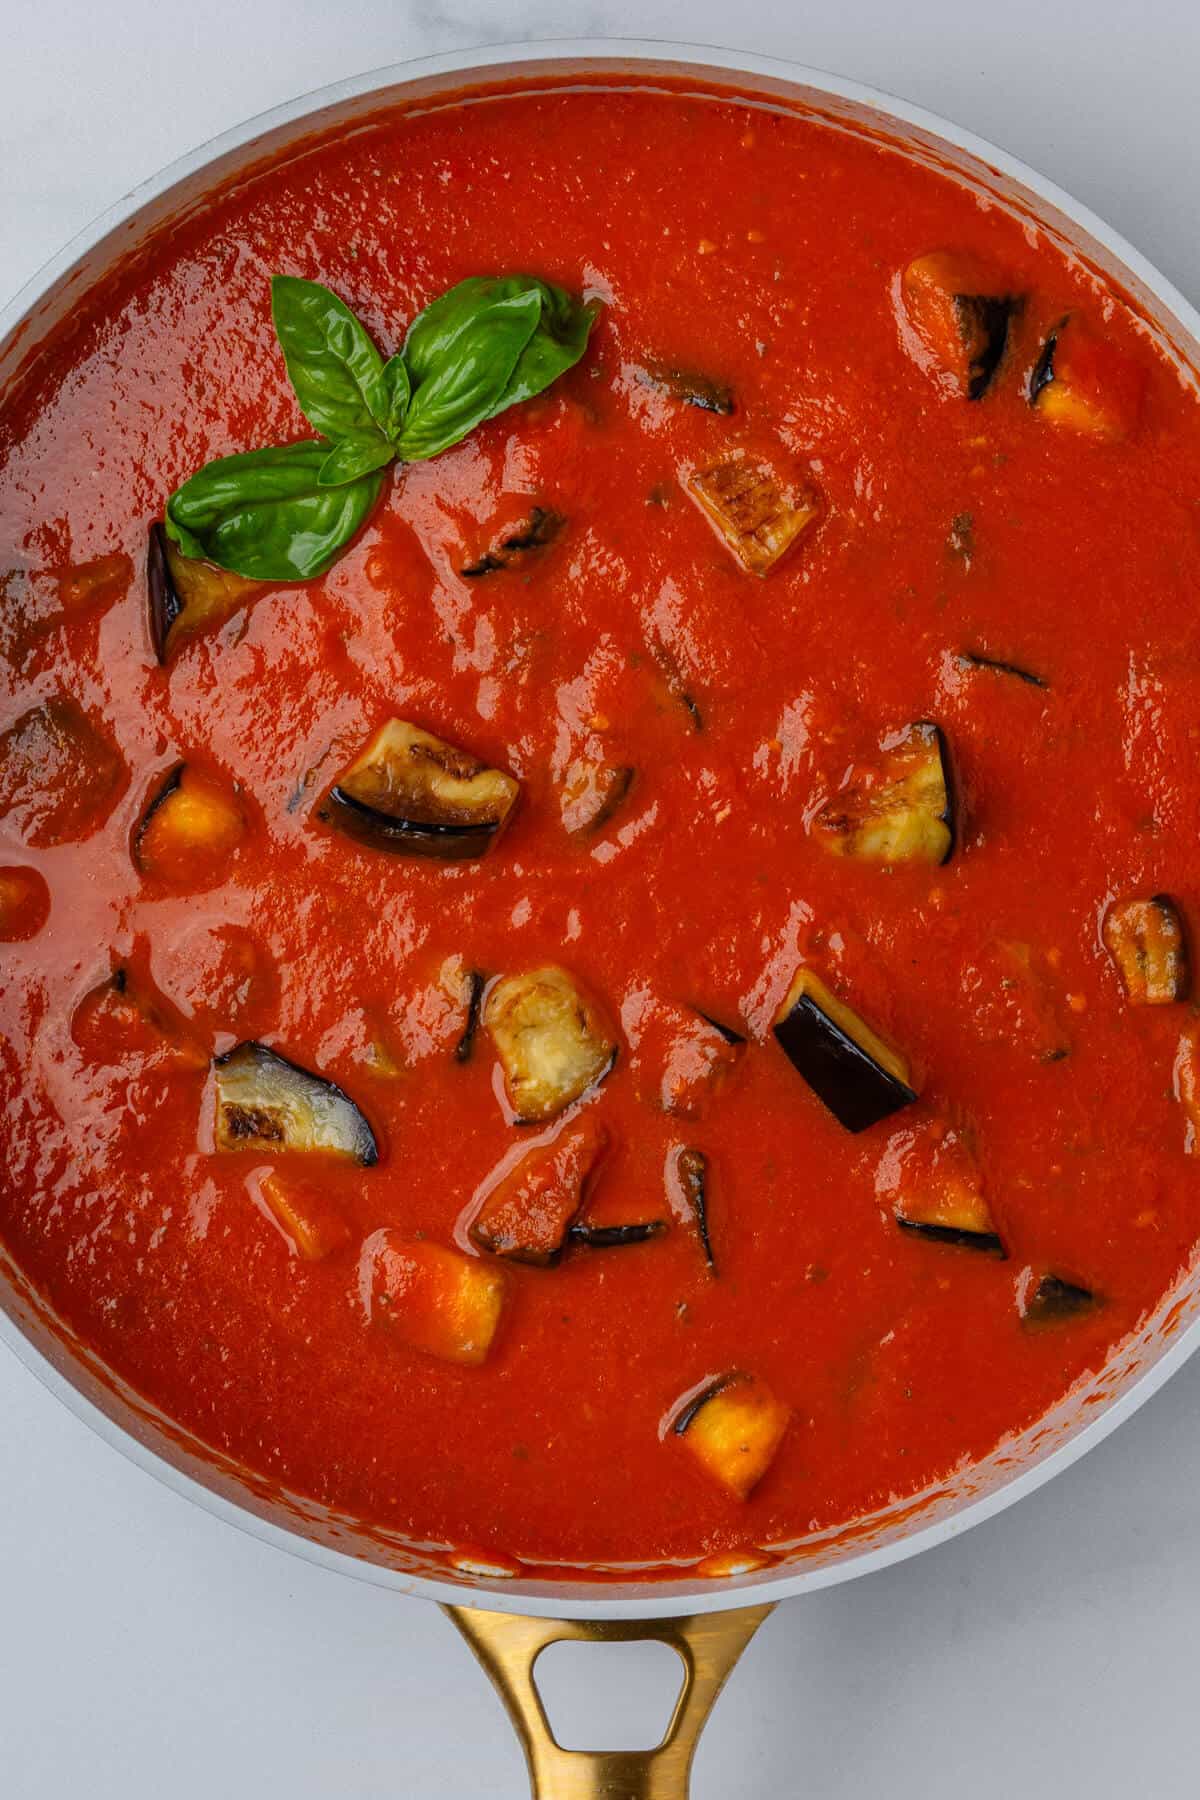 Pan of rich tomato sauce with eggplants